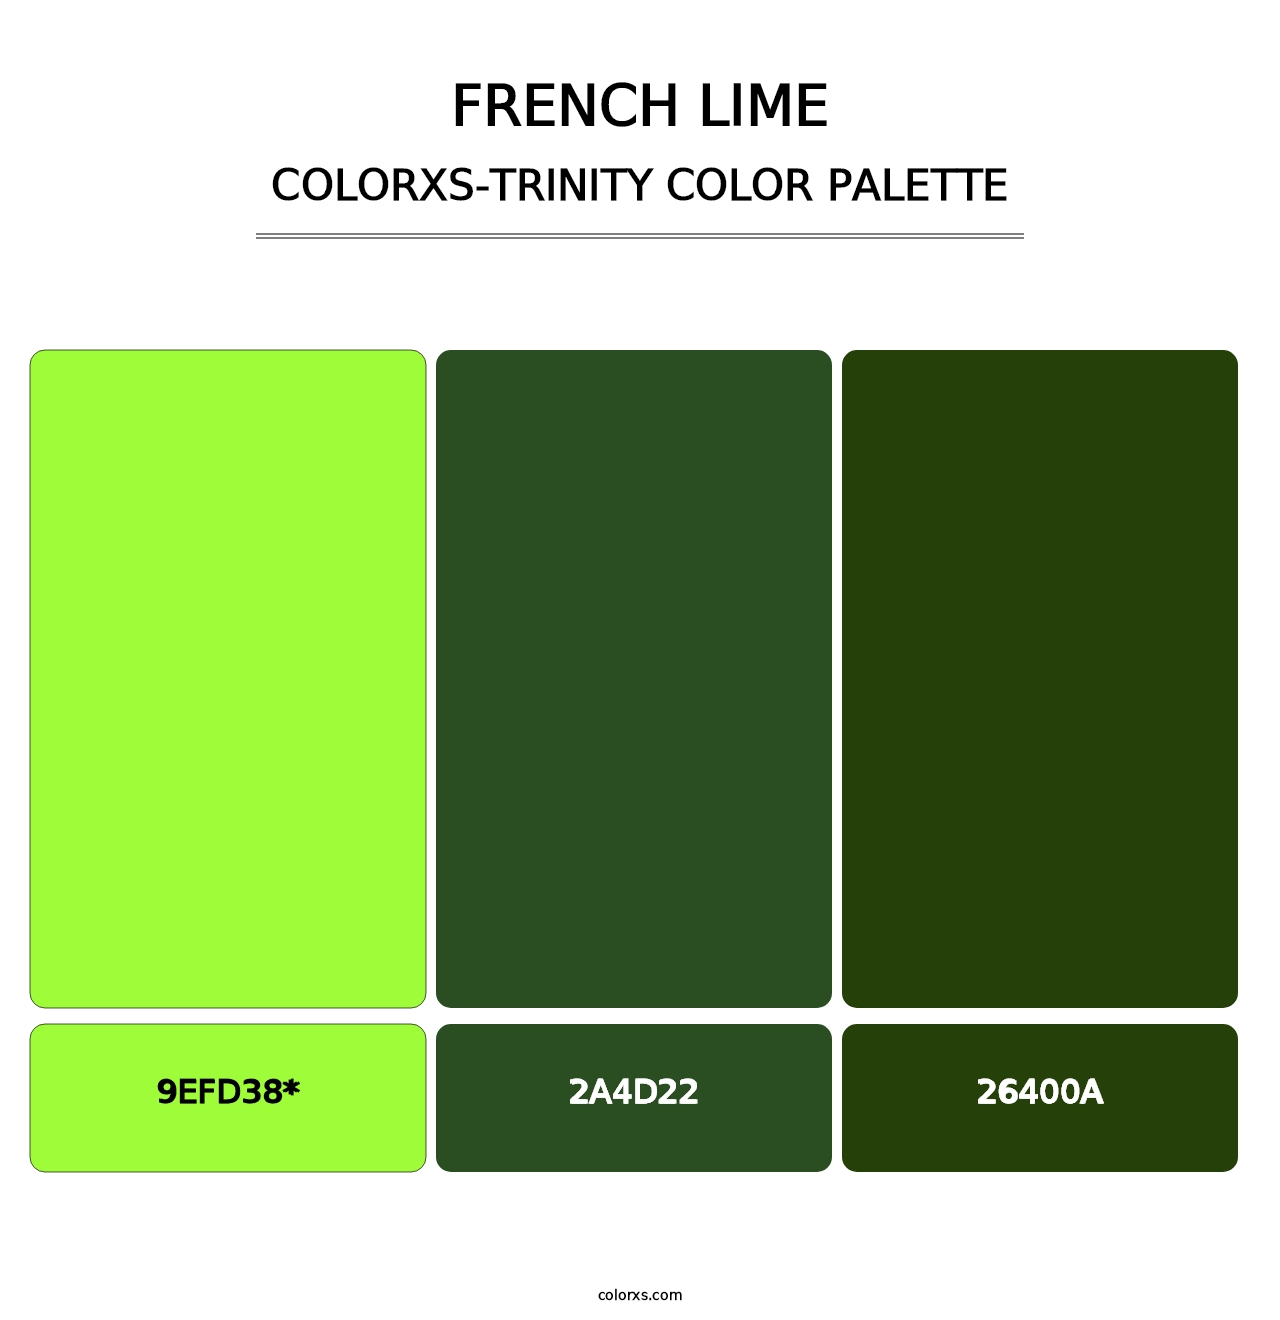 French Lime - Colorxs Trinity Palette